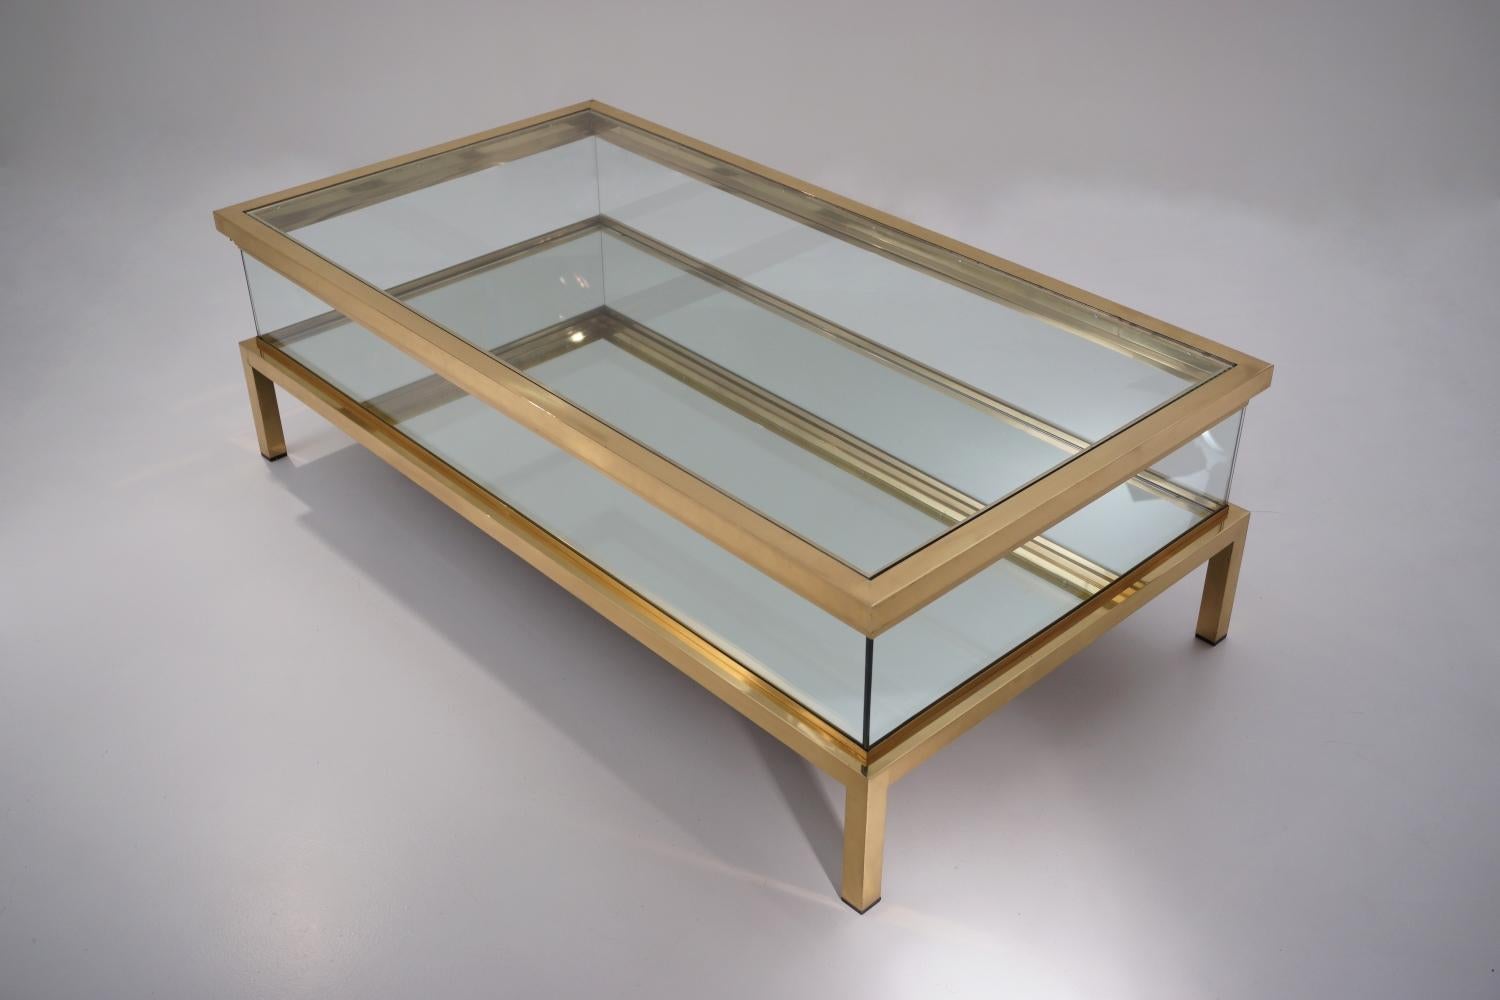 French Maison Jansen Brass Two Tier Sliding Top Display Coffee Table, Mirrored Shelf